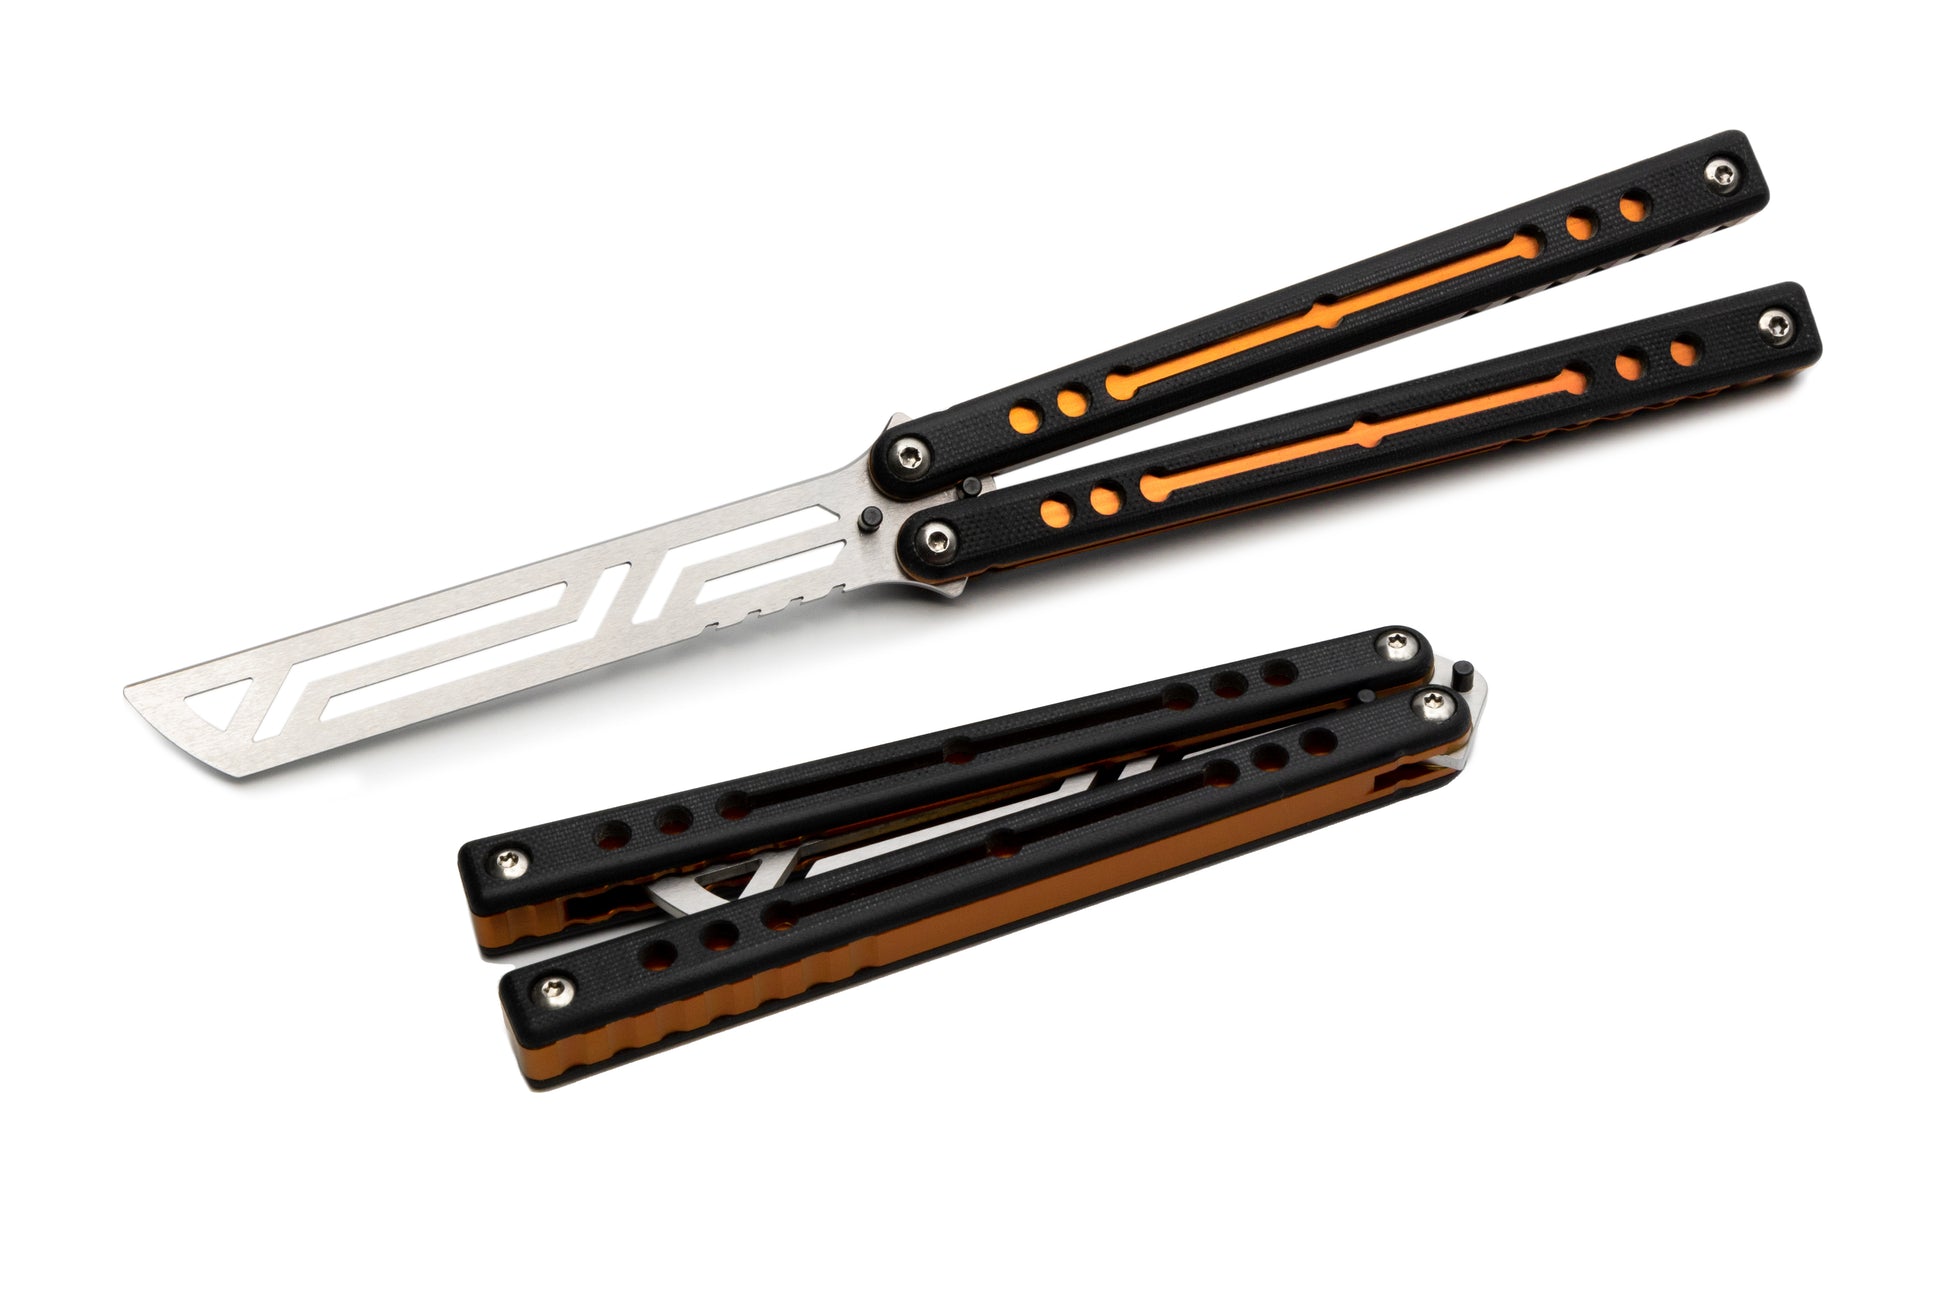 Orange NautilusV2 balisong with g10 scales